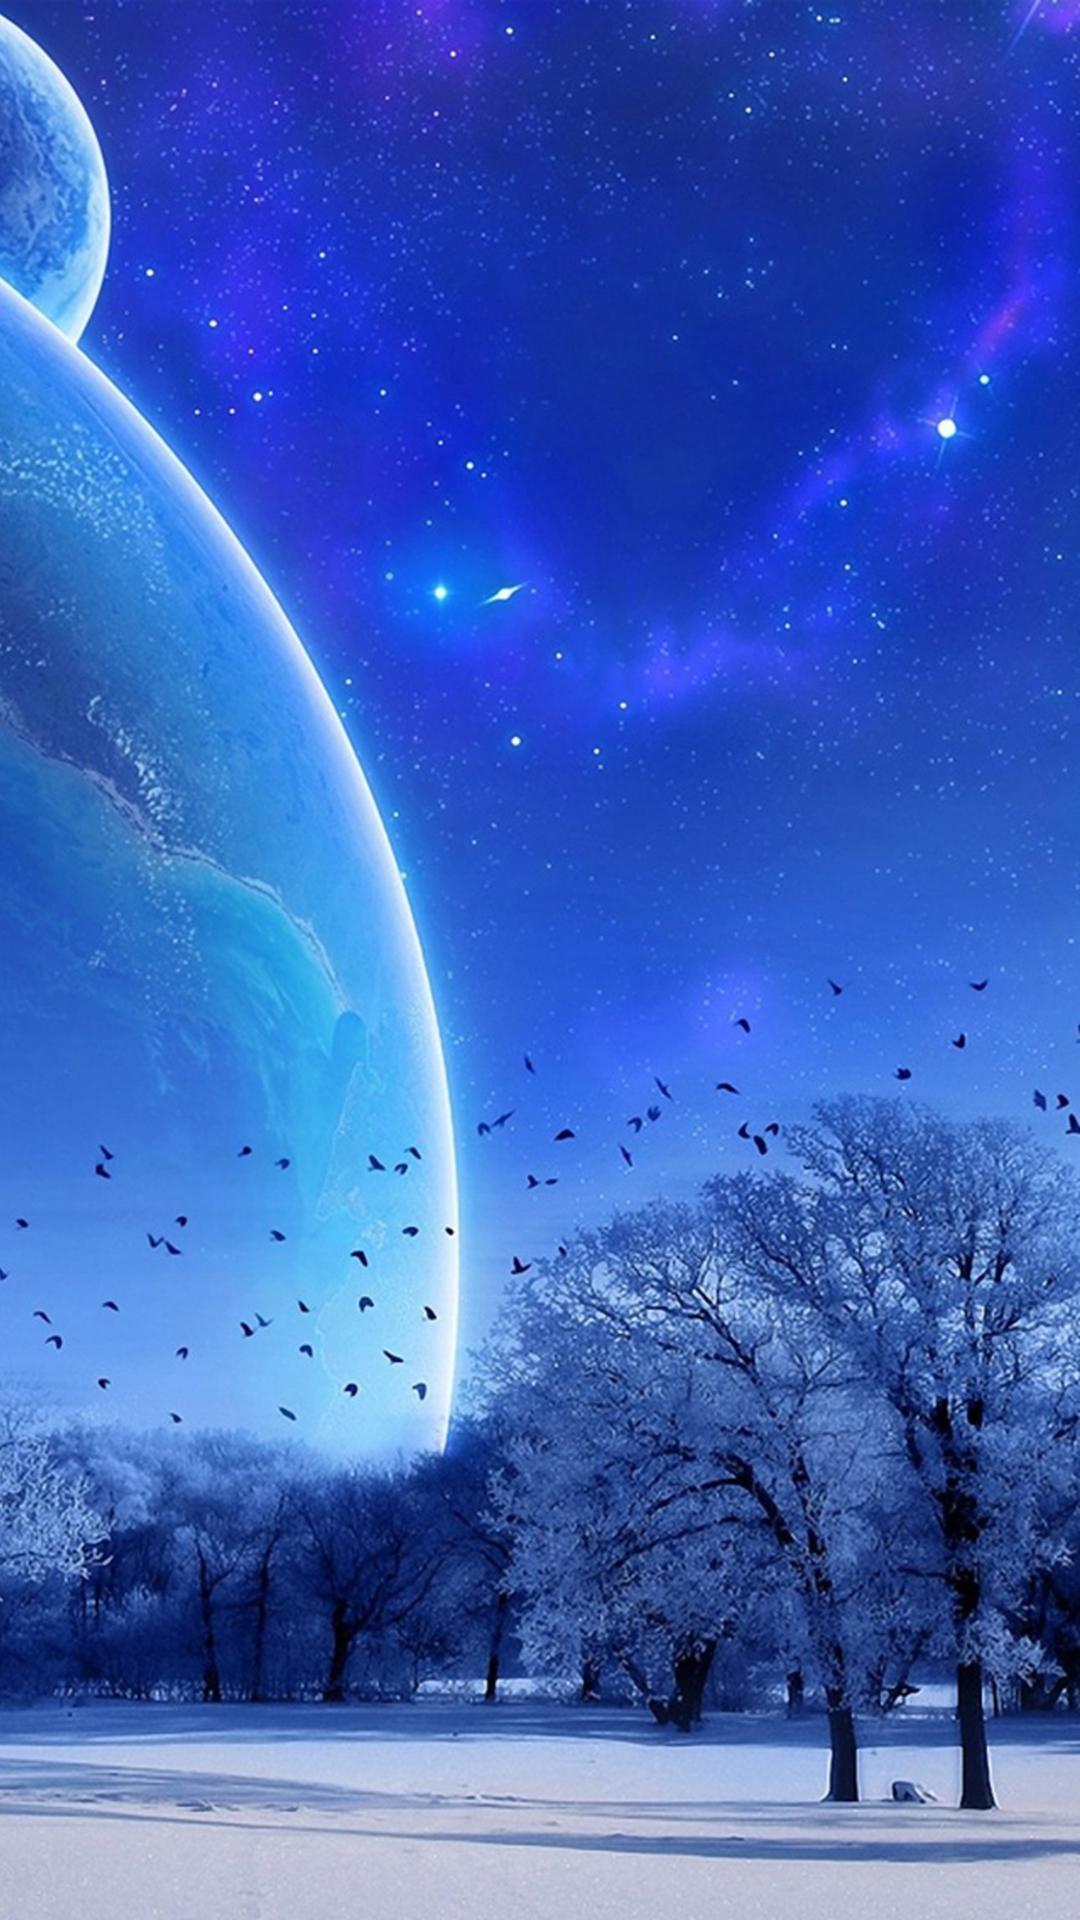 Fantasy Winter Skyscape Space View iPhone 8 Wallpaper Free